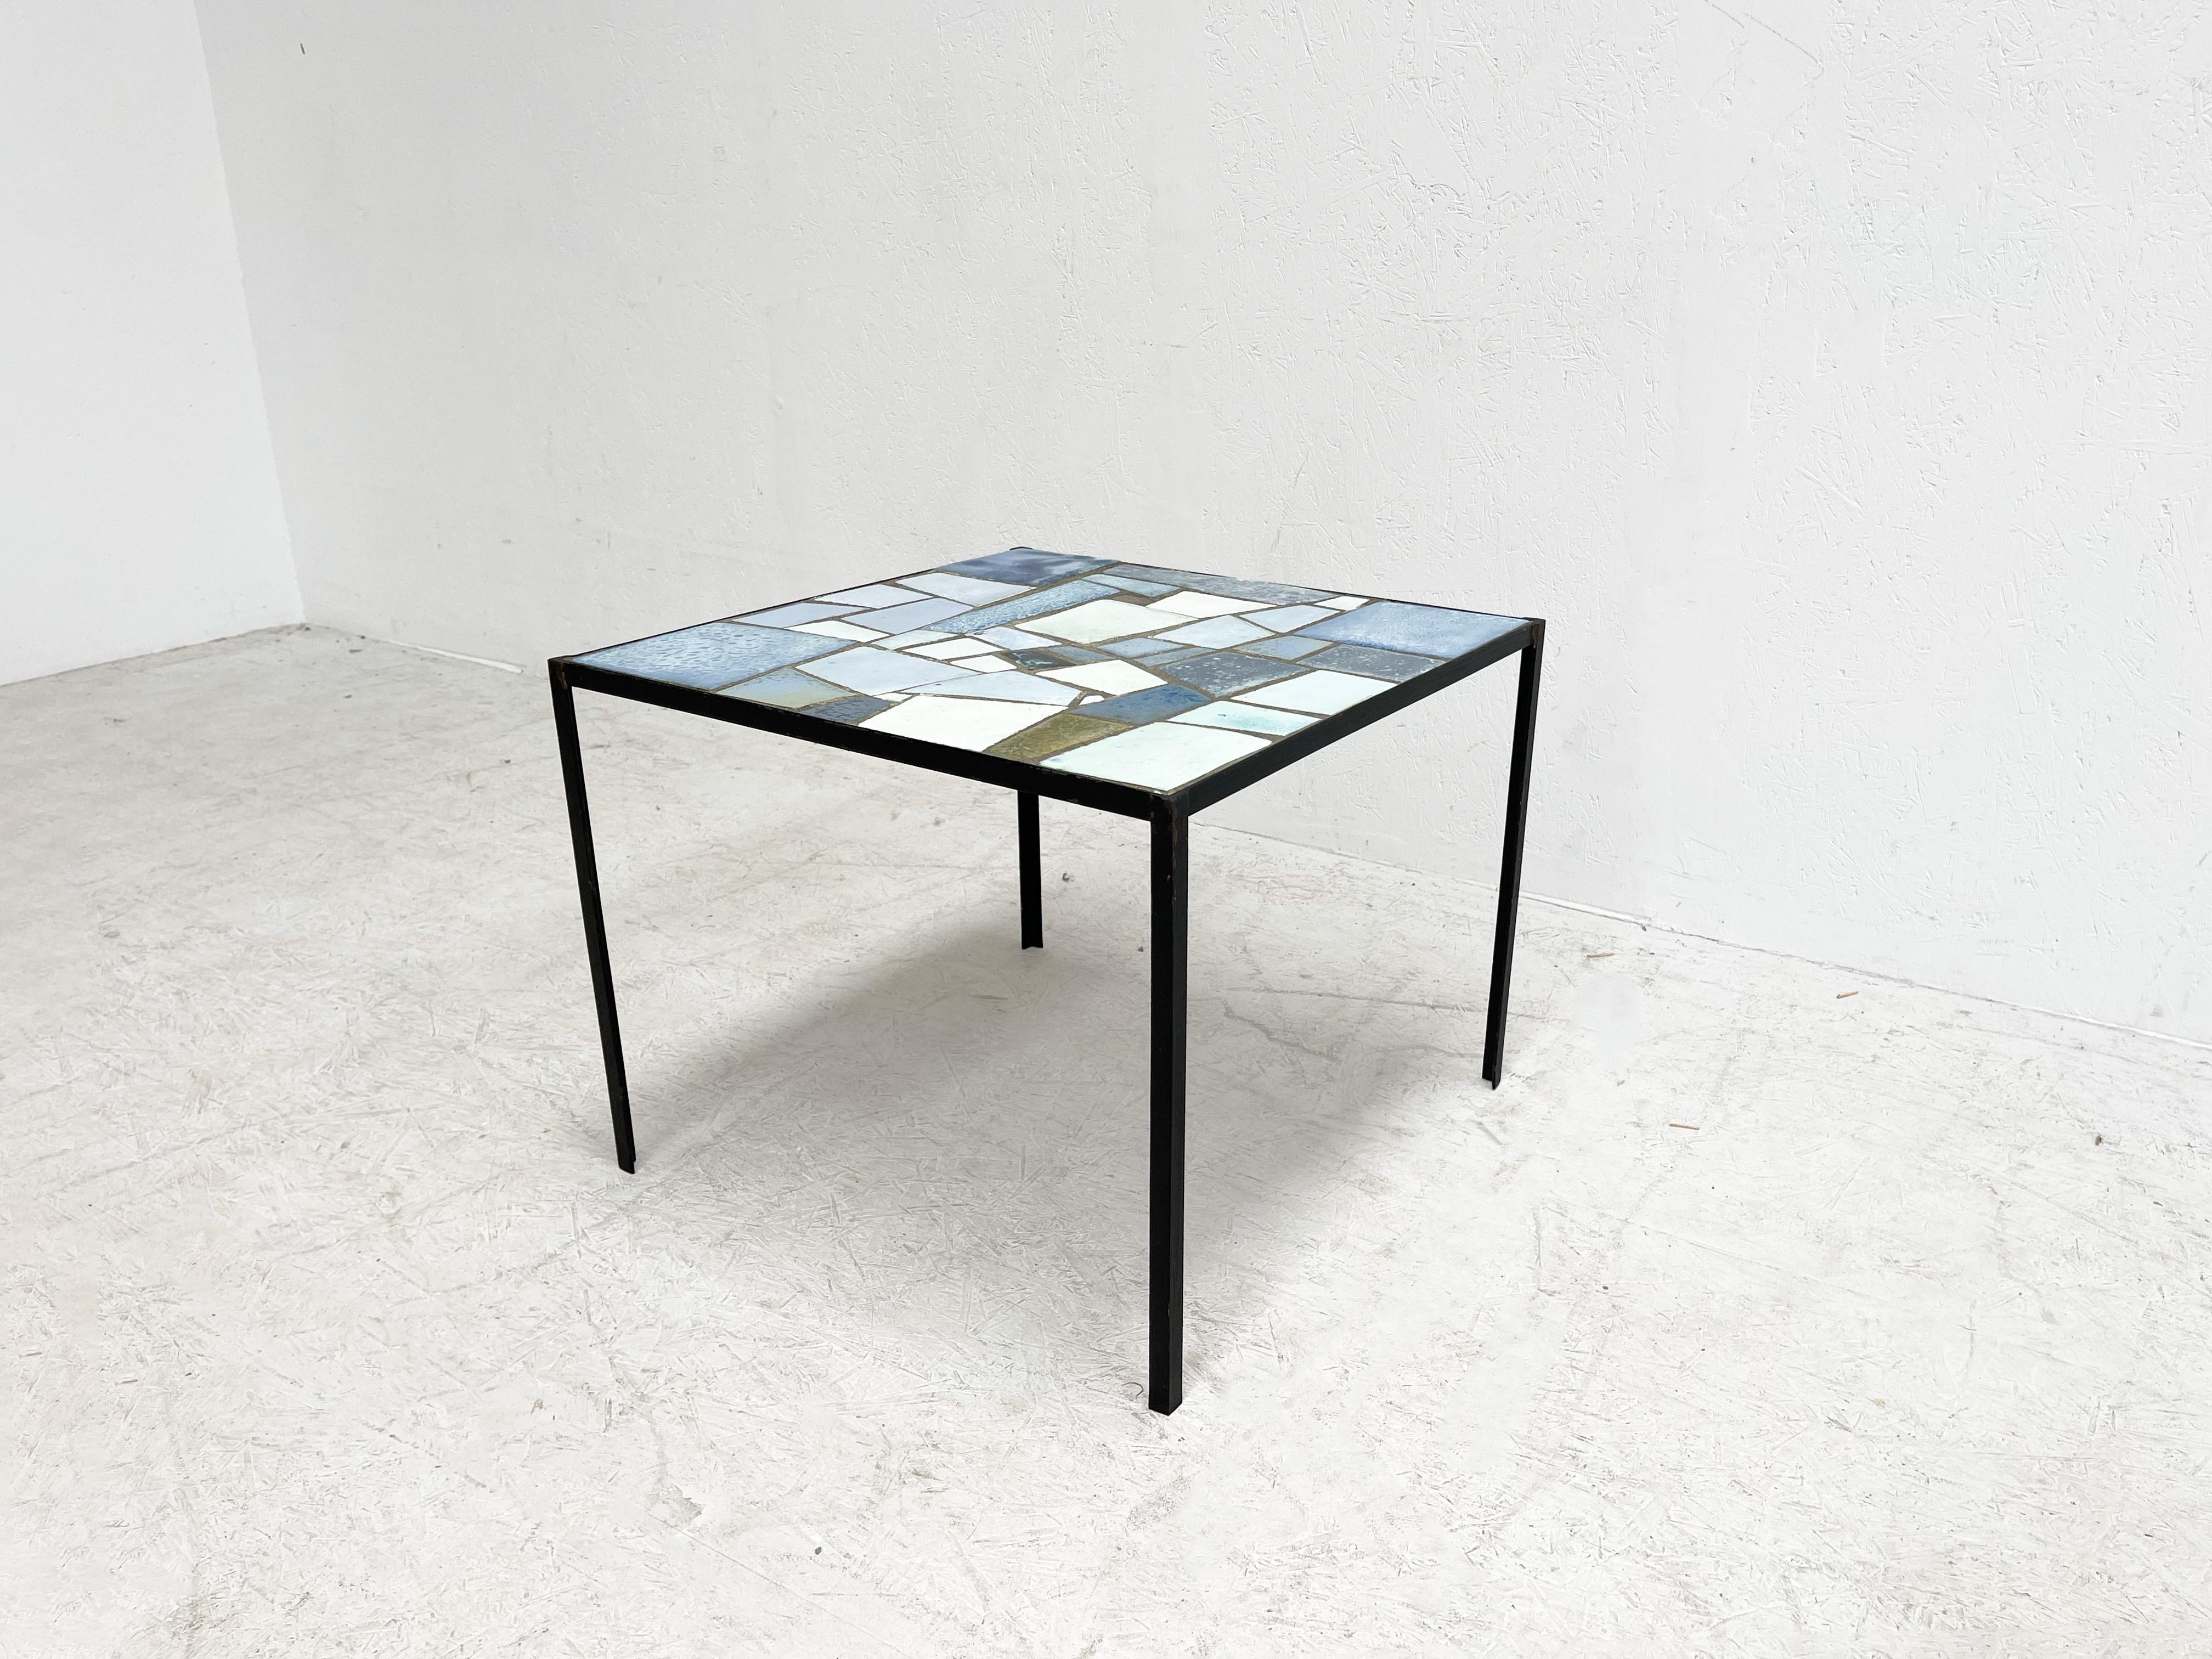 Abstract coffee table by Belgian Ceramic artist Louise Servaes. This table was designed in the 1970s. It displays an abstract pattern with very nice blue stone inlay.
 
Louise Servaese was a very well known and renowned artist with many